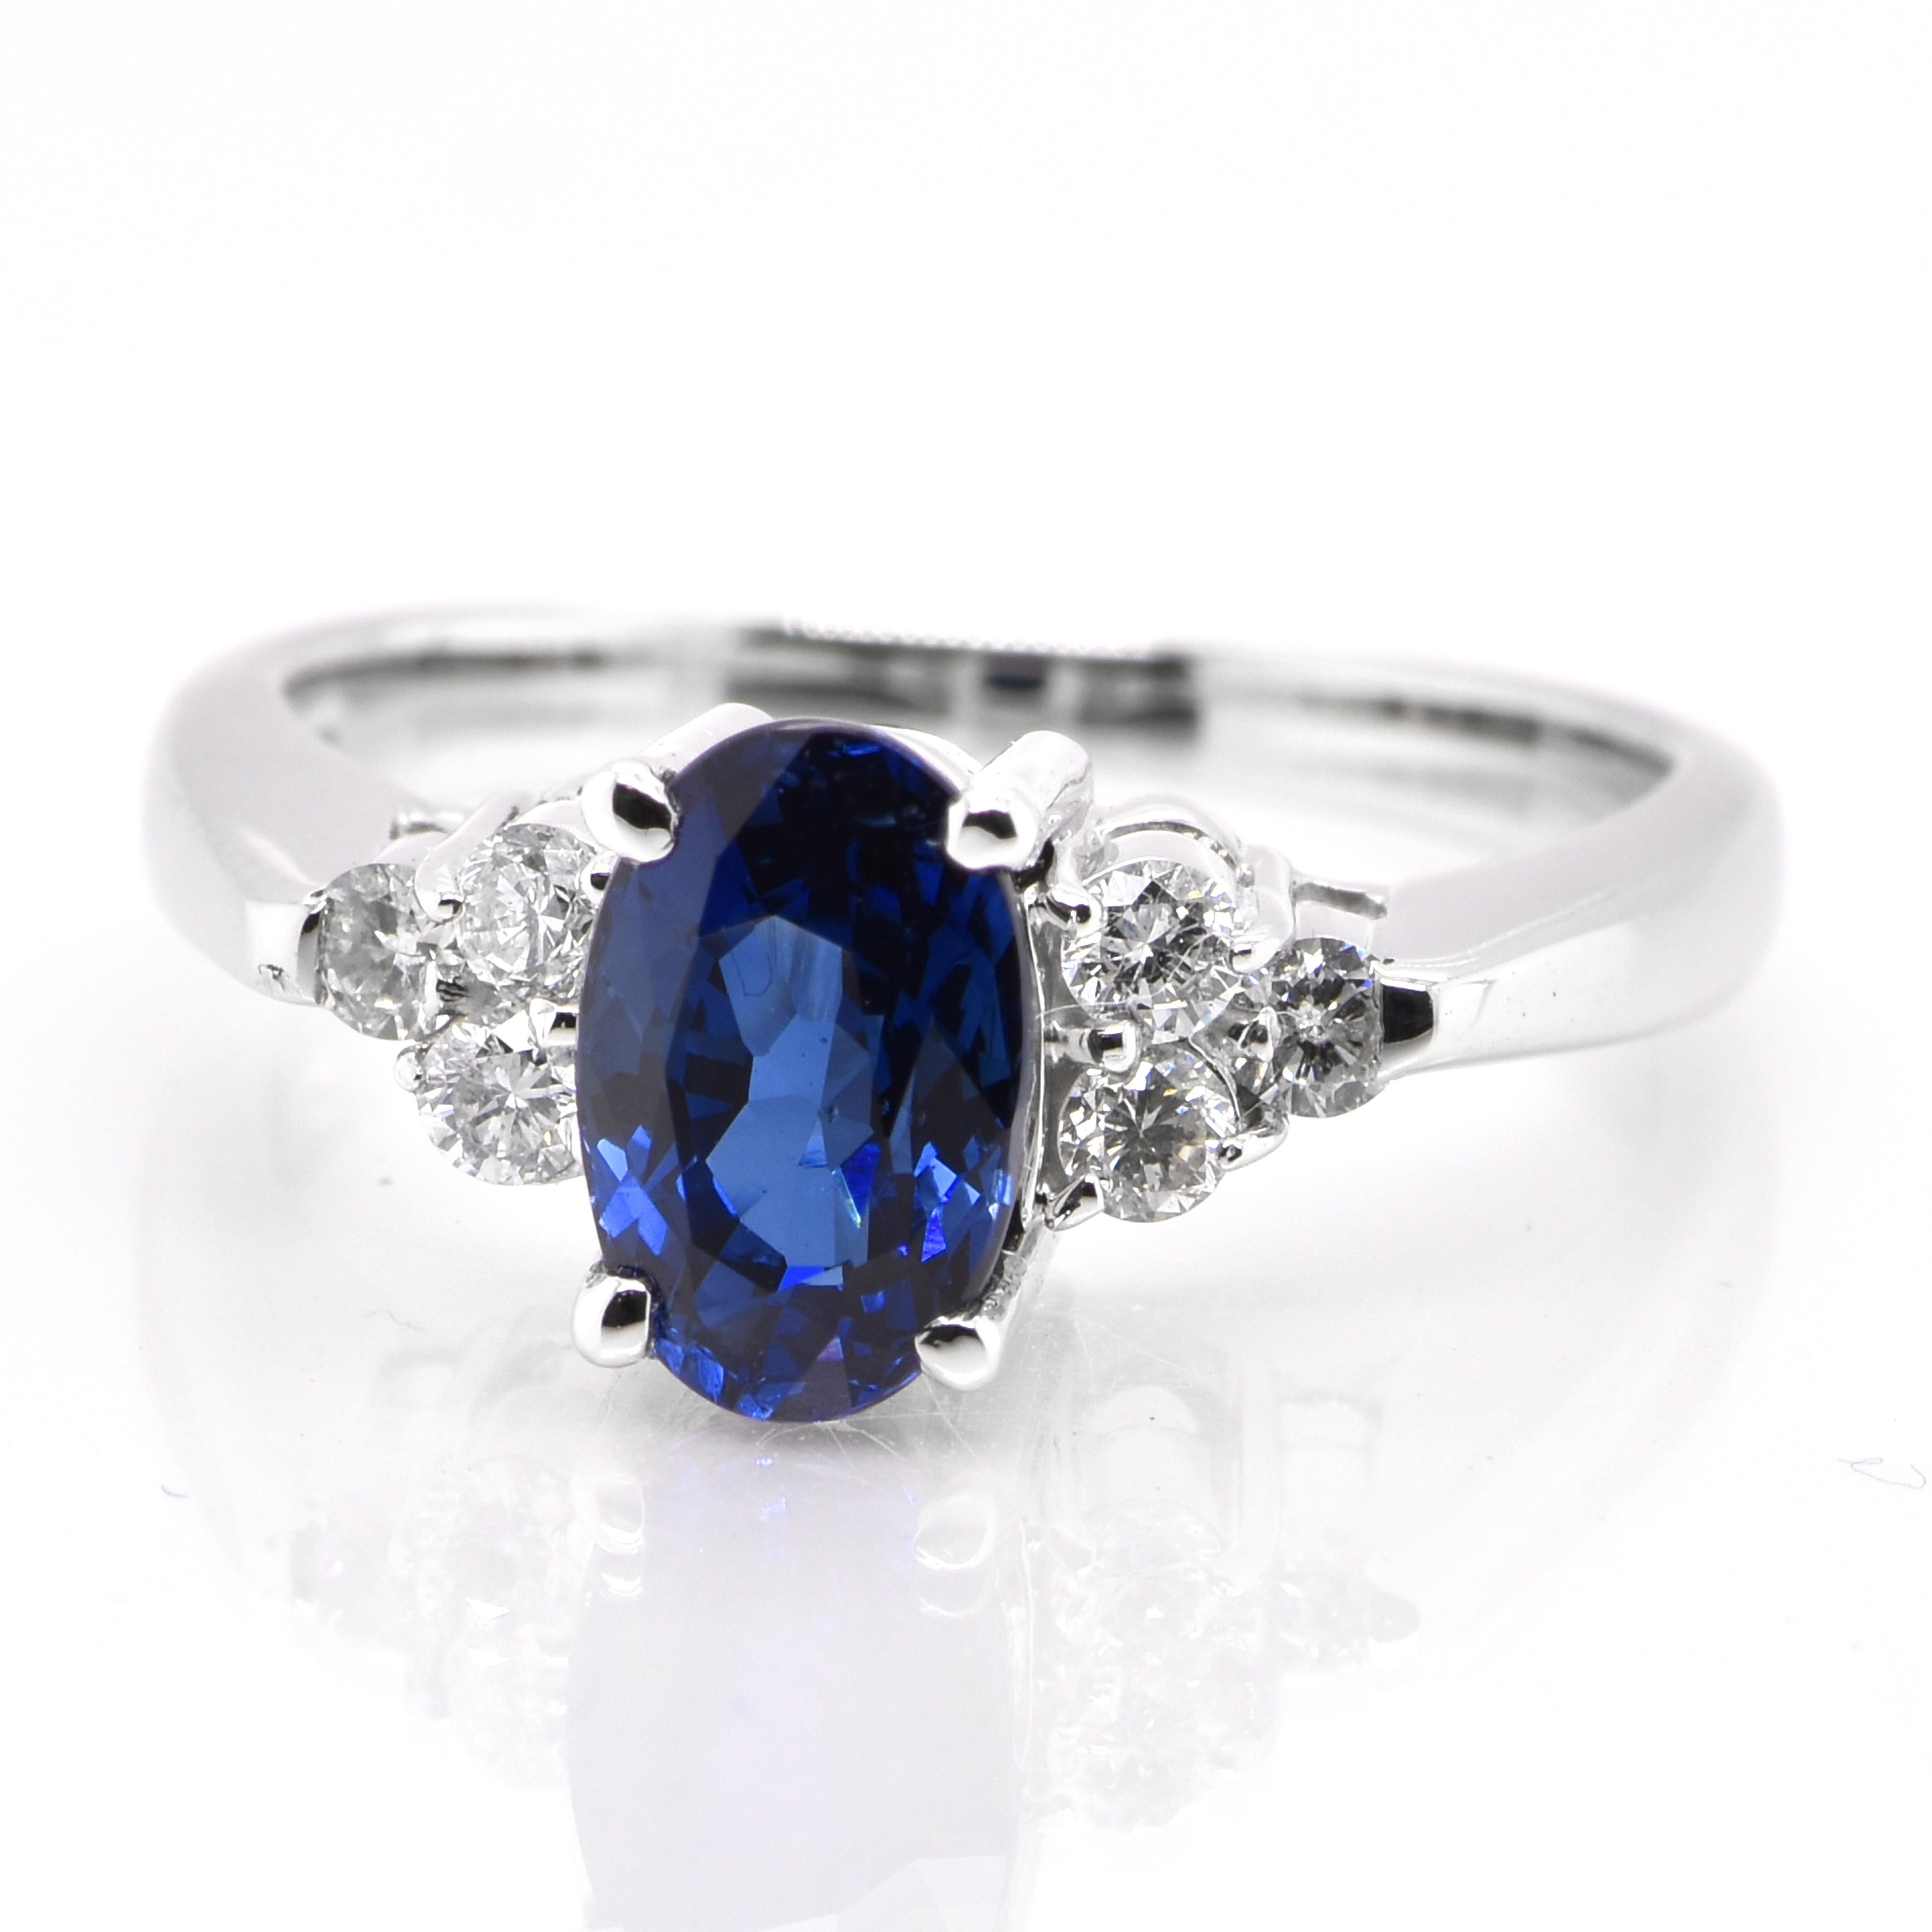 A beautiful ring featuring 1.65 Carat Natural Blue Sapphire and 0.24 Carats Diamond Accents set in Platinum. Sapphires have extraordinary durability - they excel in hardness as well as toughness and durability making them very popular in jewelry.